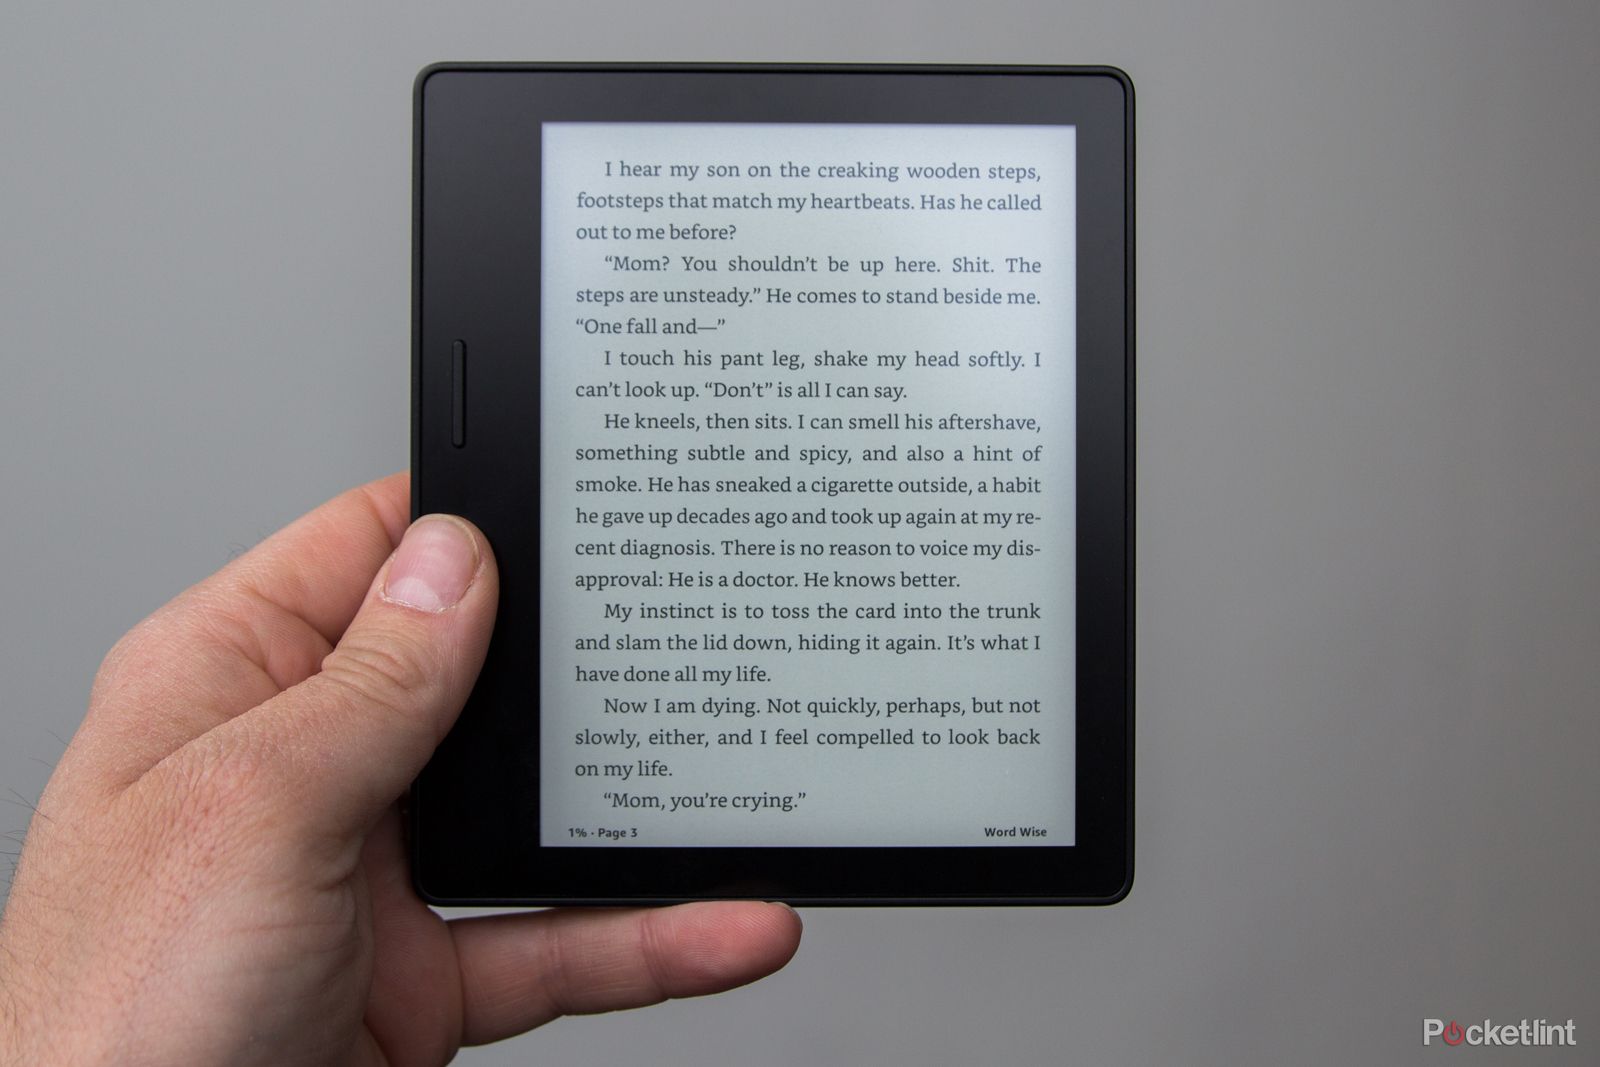 amazon kindle a brief history from the original kindle onwards image 9